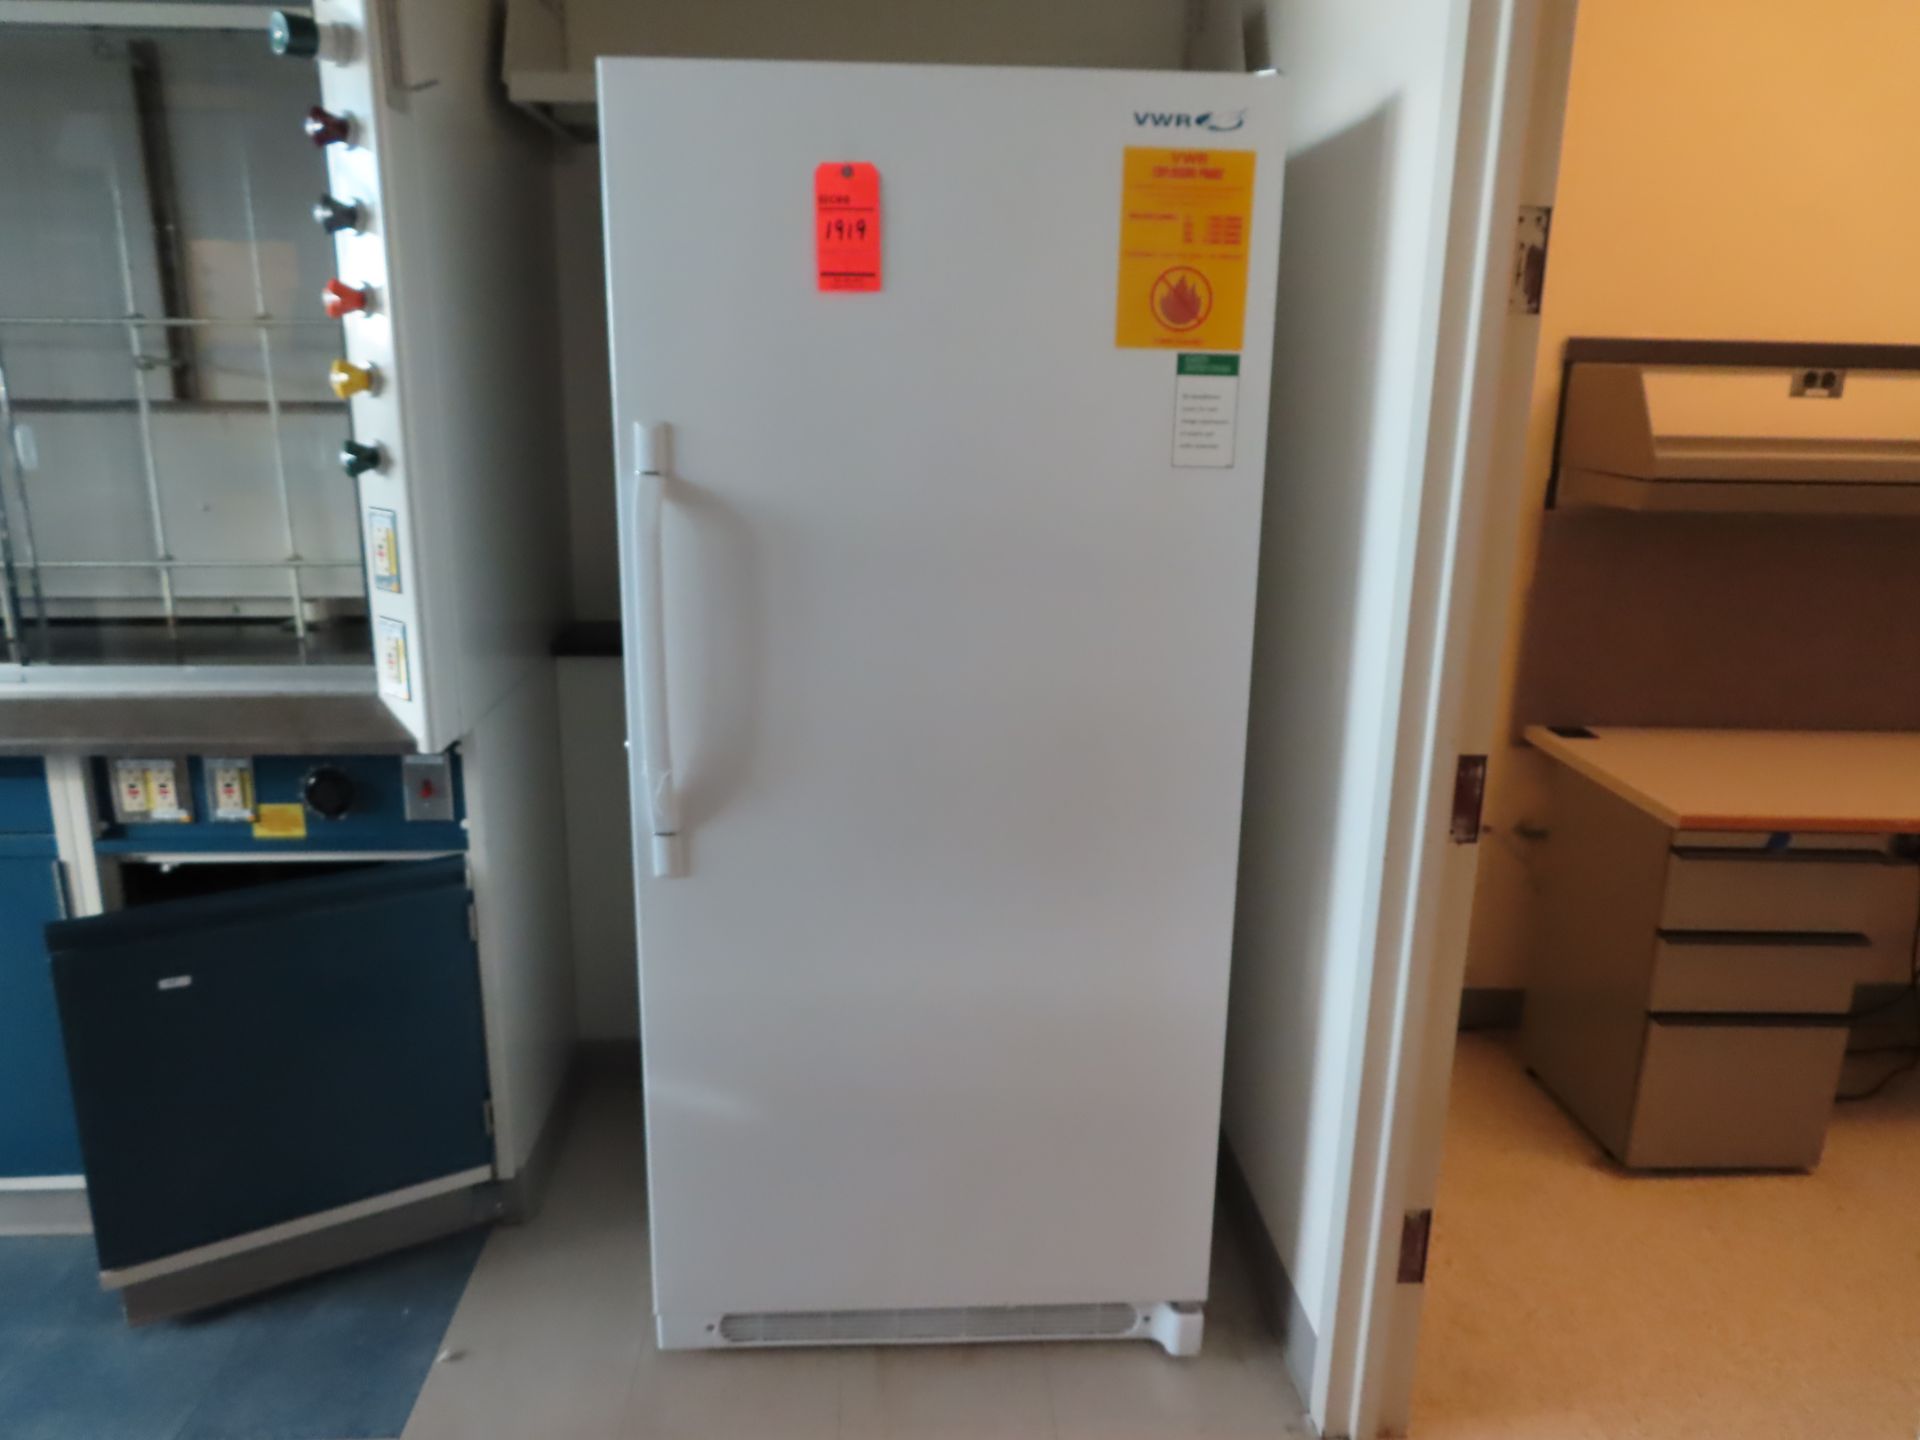 VWR explosion proof freezer, located C wing 4th floor, room 464A